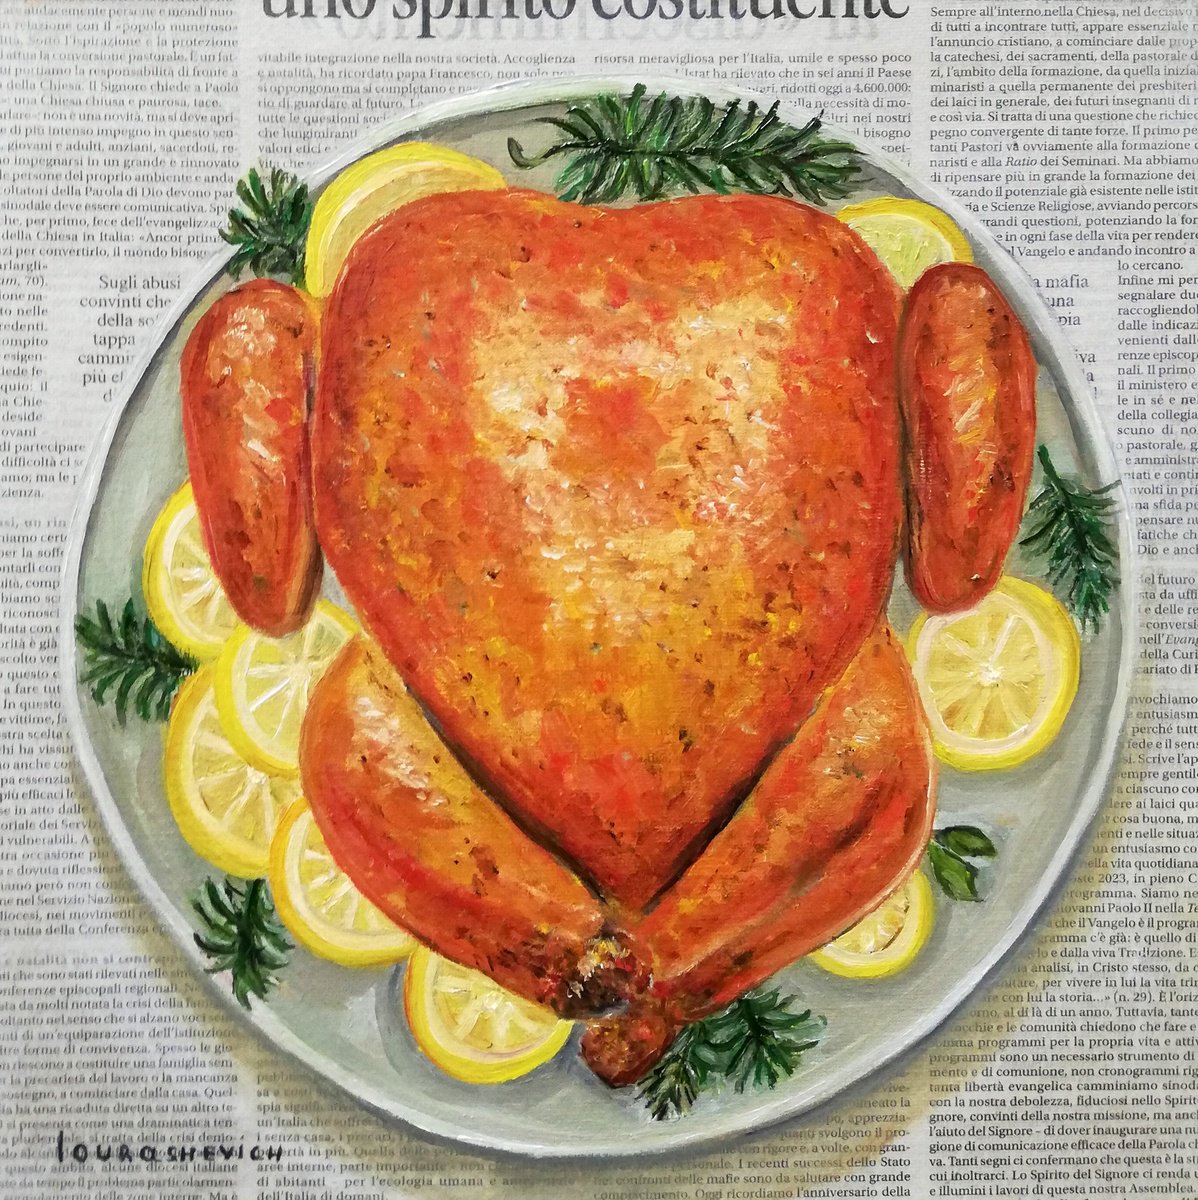 Roasted Turkey in a Plate on Newspaper Original Oil on Canvas Board 12 by 12 inches (30x... by Katia Ricci